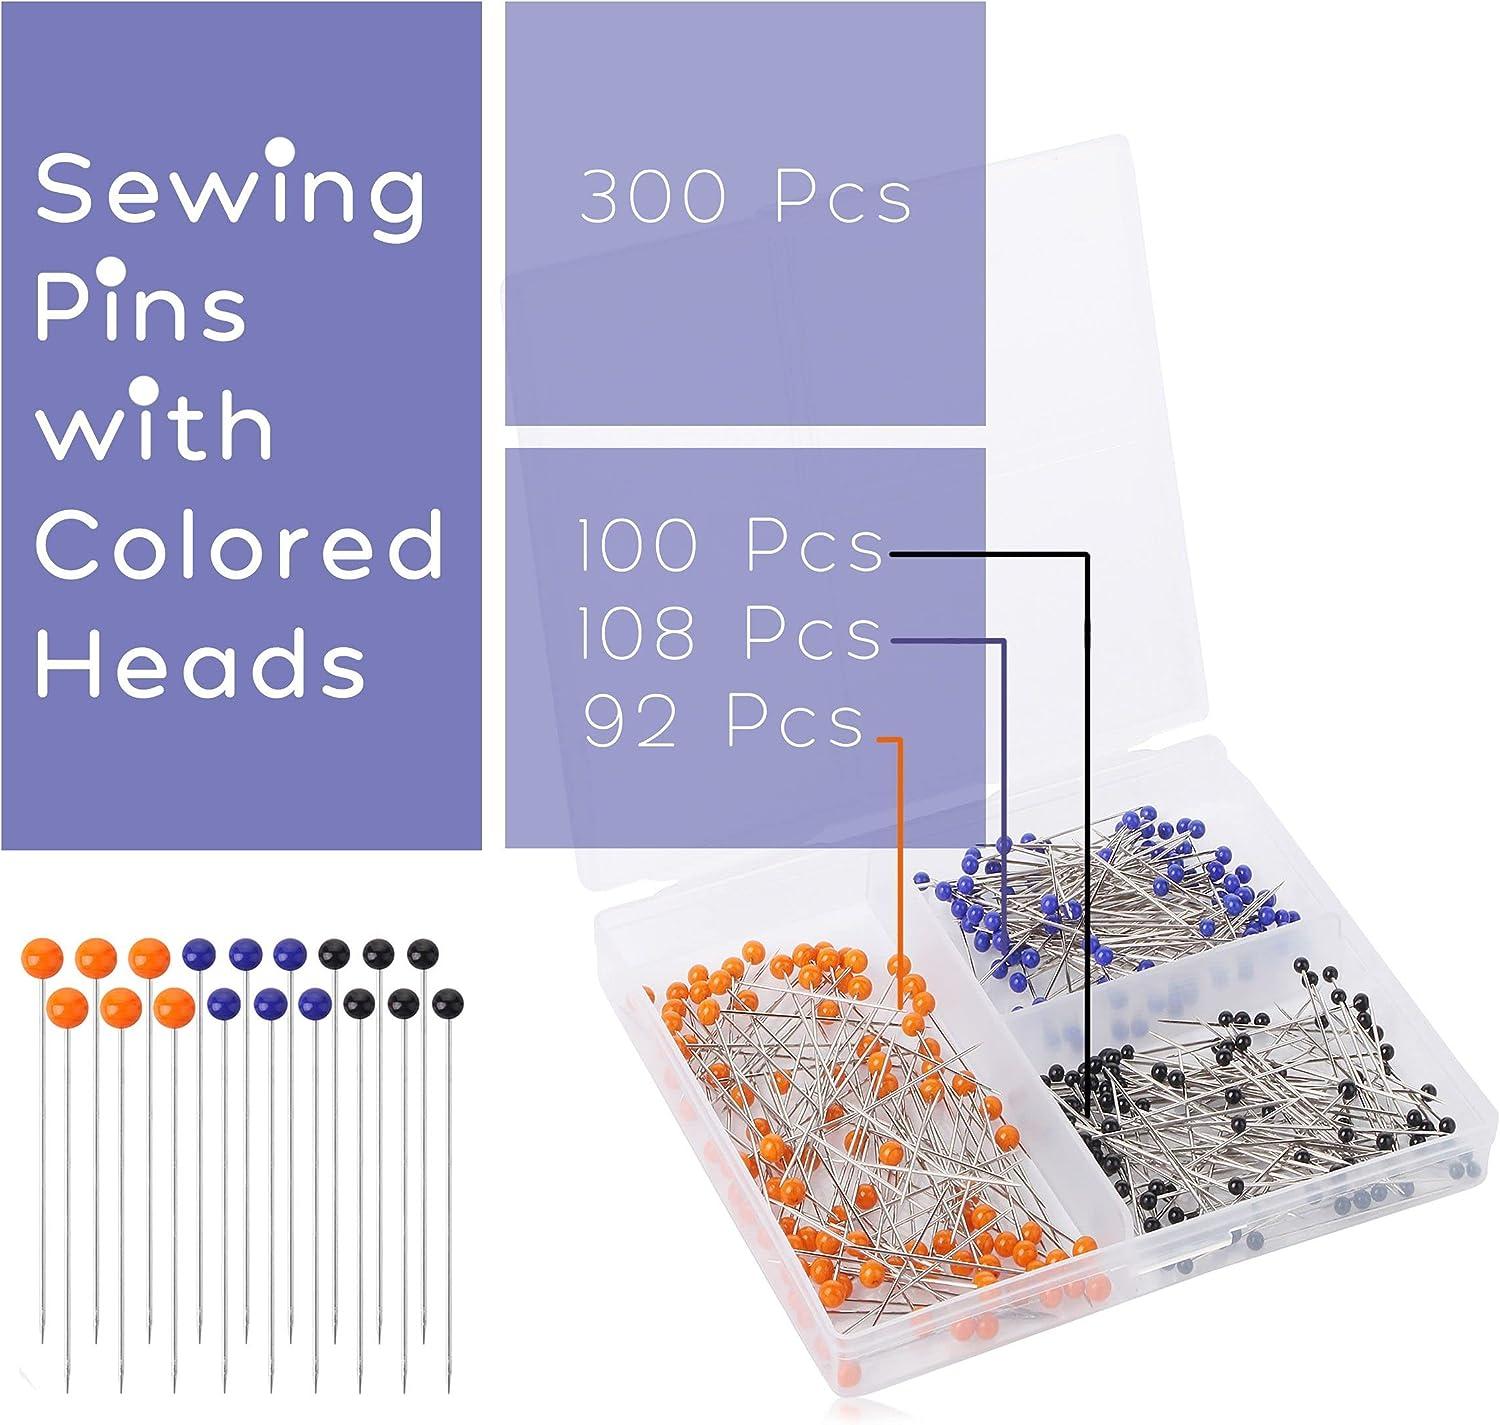 Mr. Pen- Sewing Pins 300 pcs Sewing Pins with Colored Heads Pins